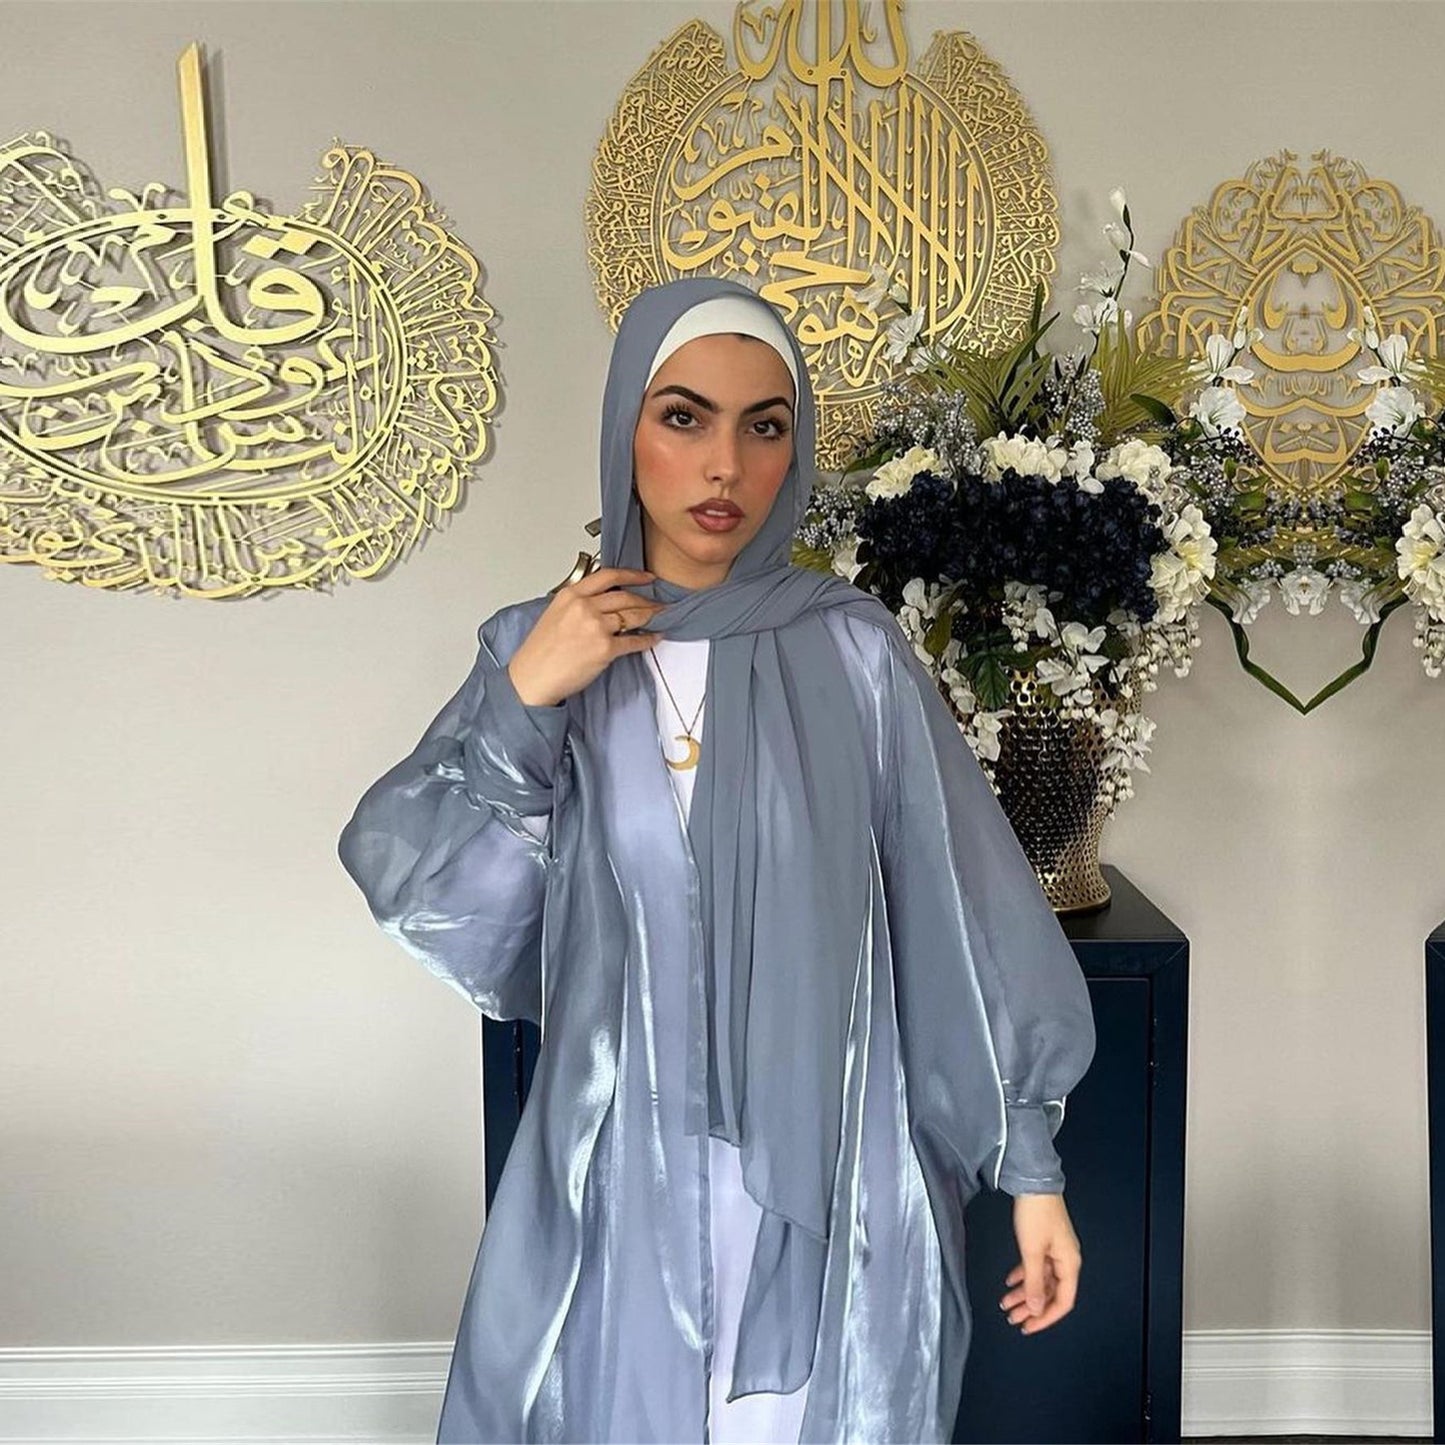 Six-color Middle East Arabic Cardigan Lace-up Bow Robe